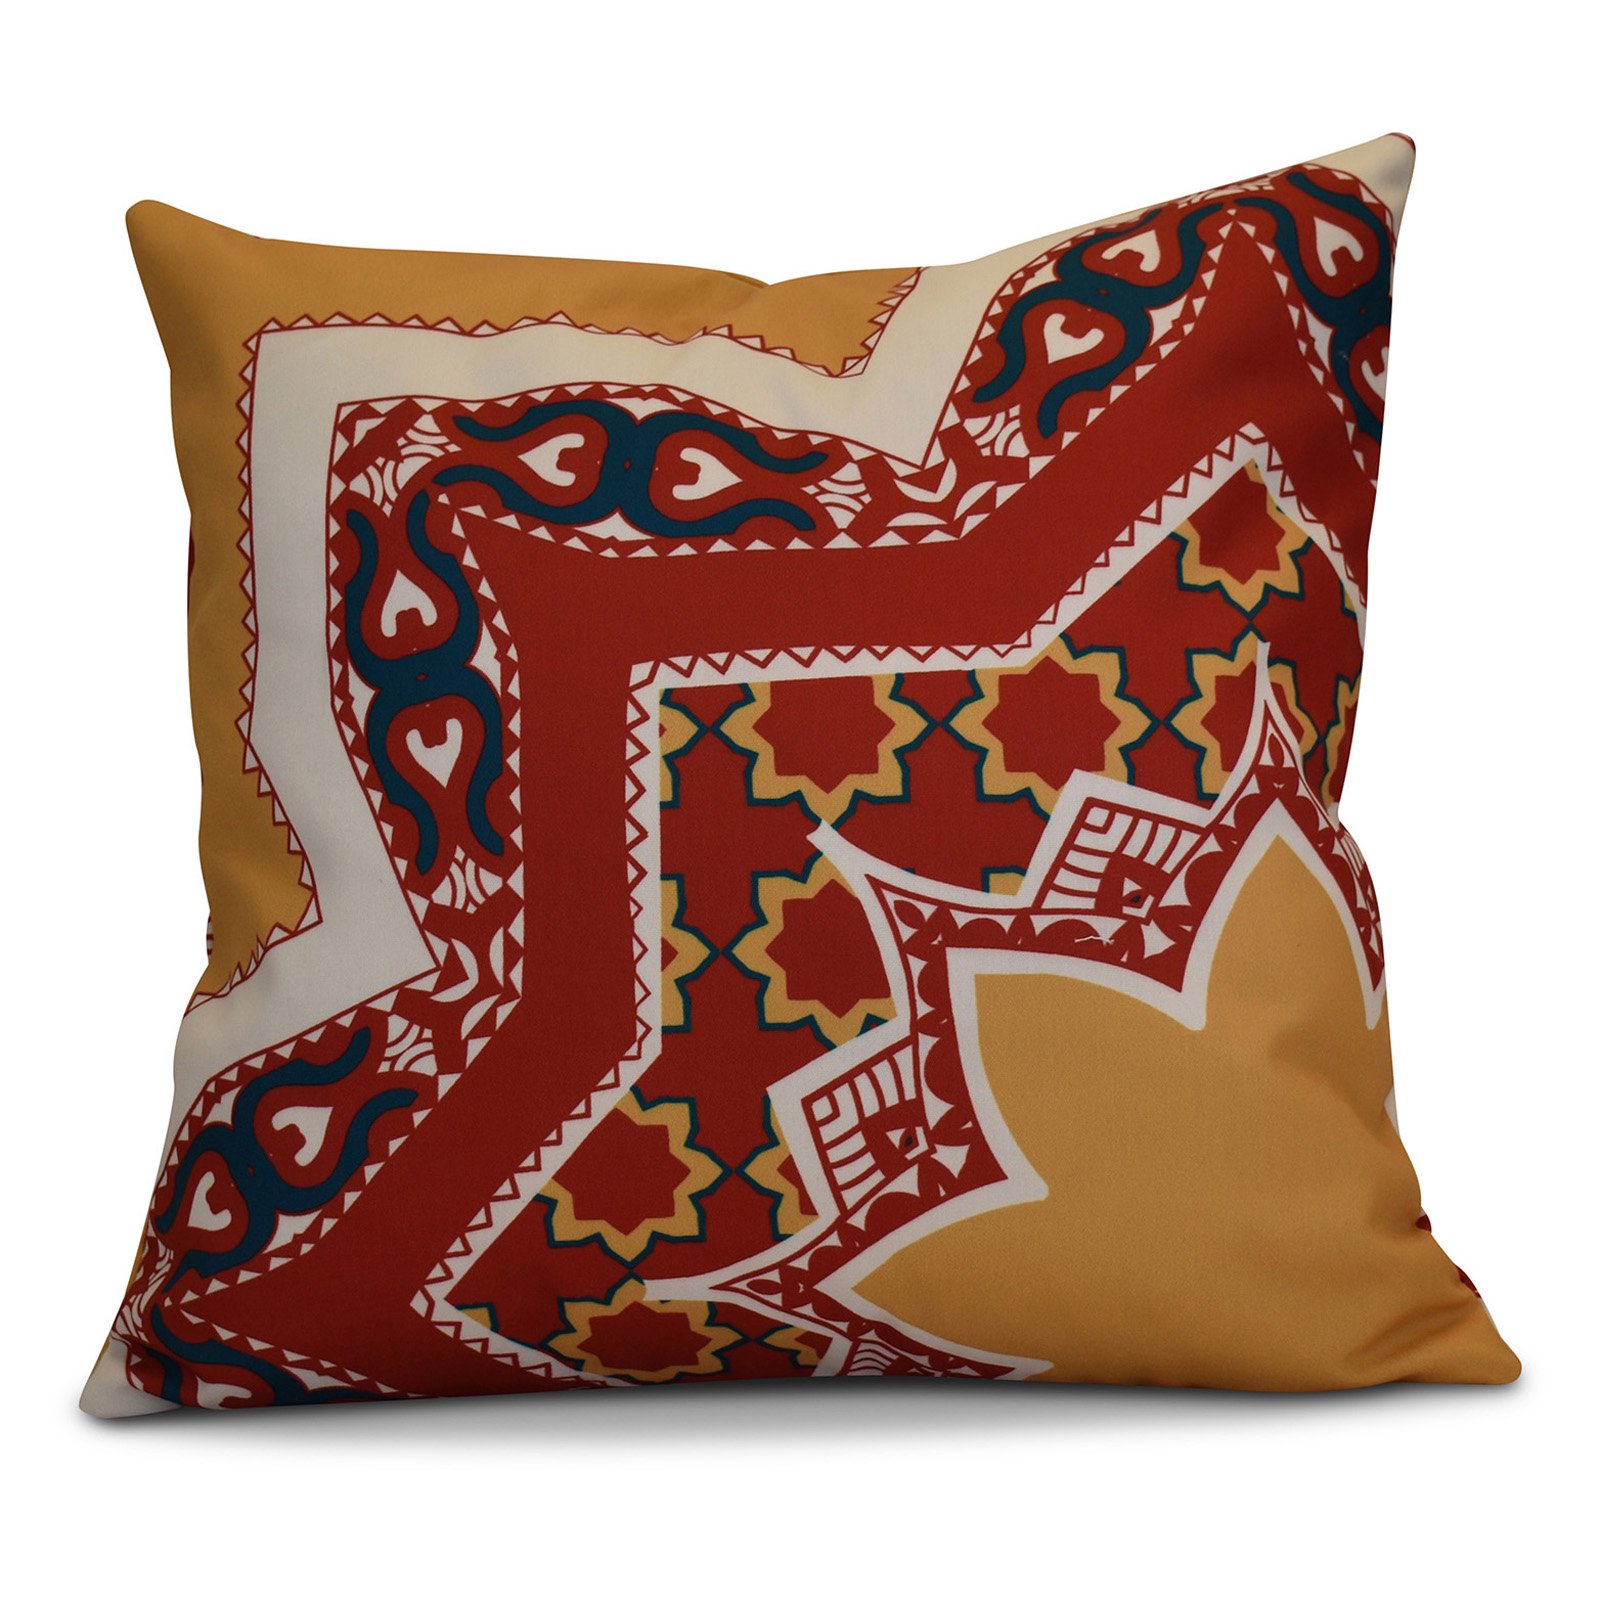 E by Design HH Revival Rising Star Print Outdoor Pillow - image 2 of 6